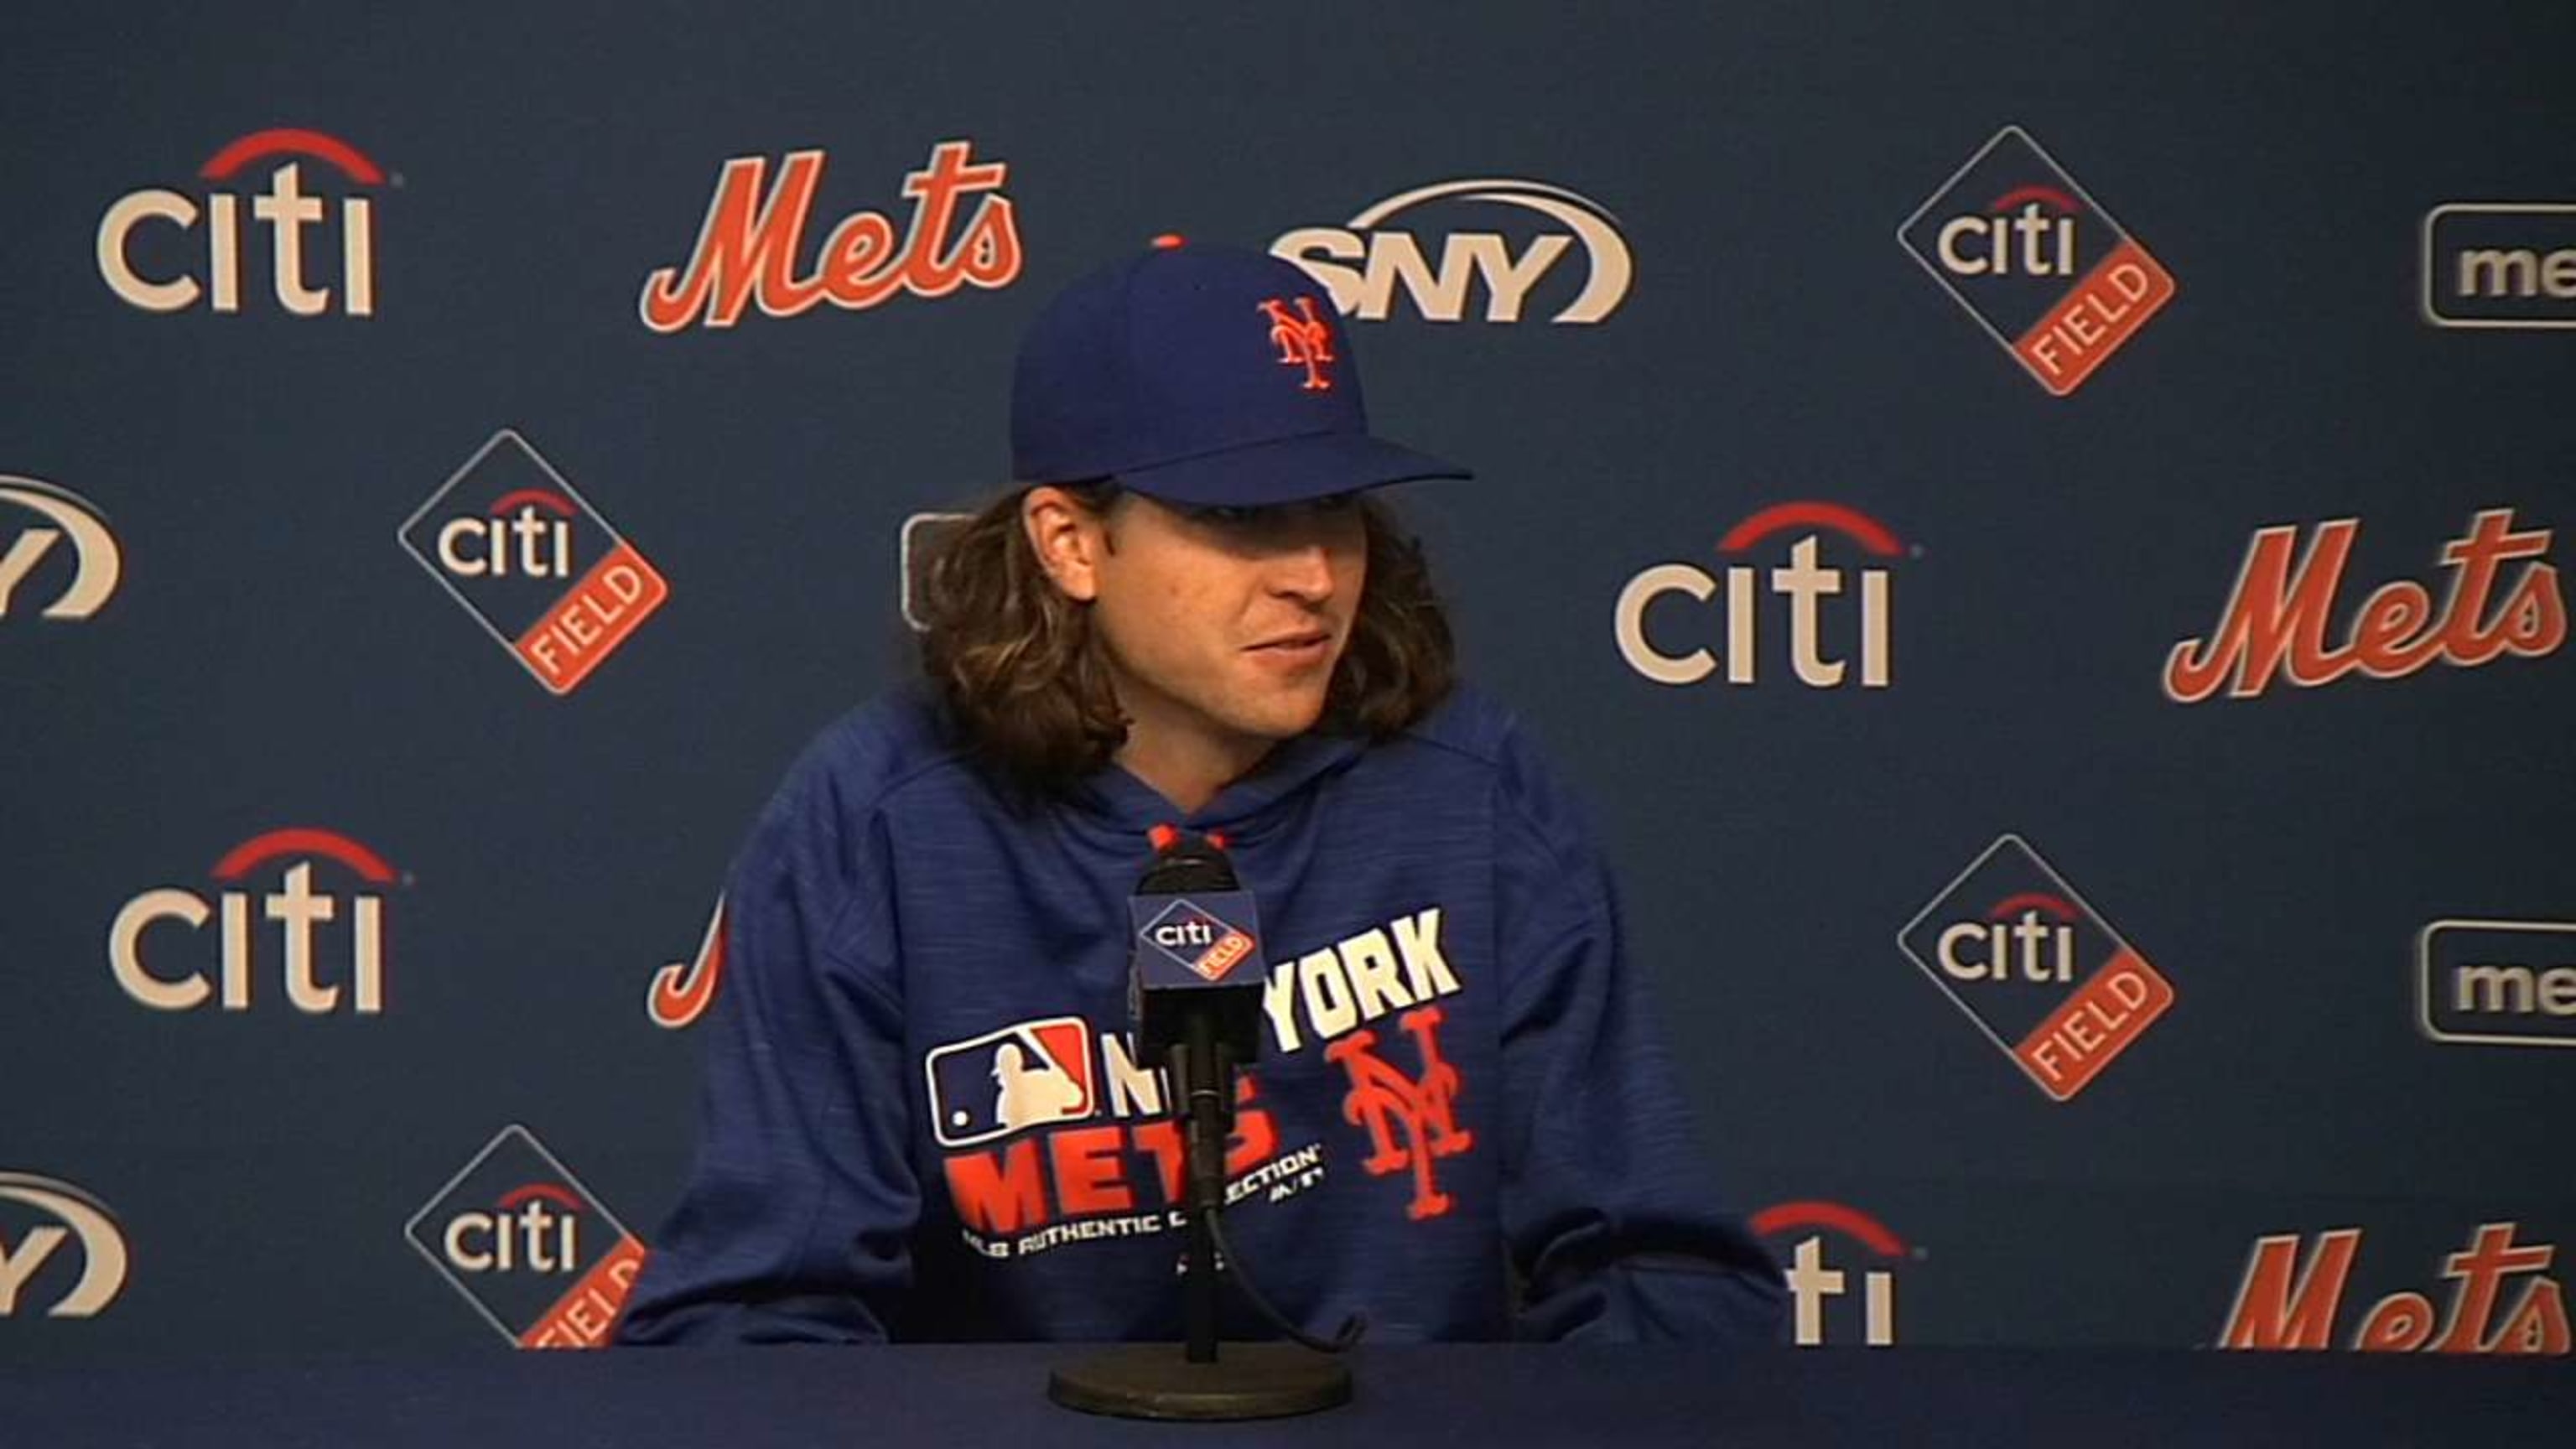 Condition improving for newborn son of Jacob deGrom of New York